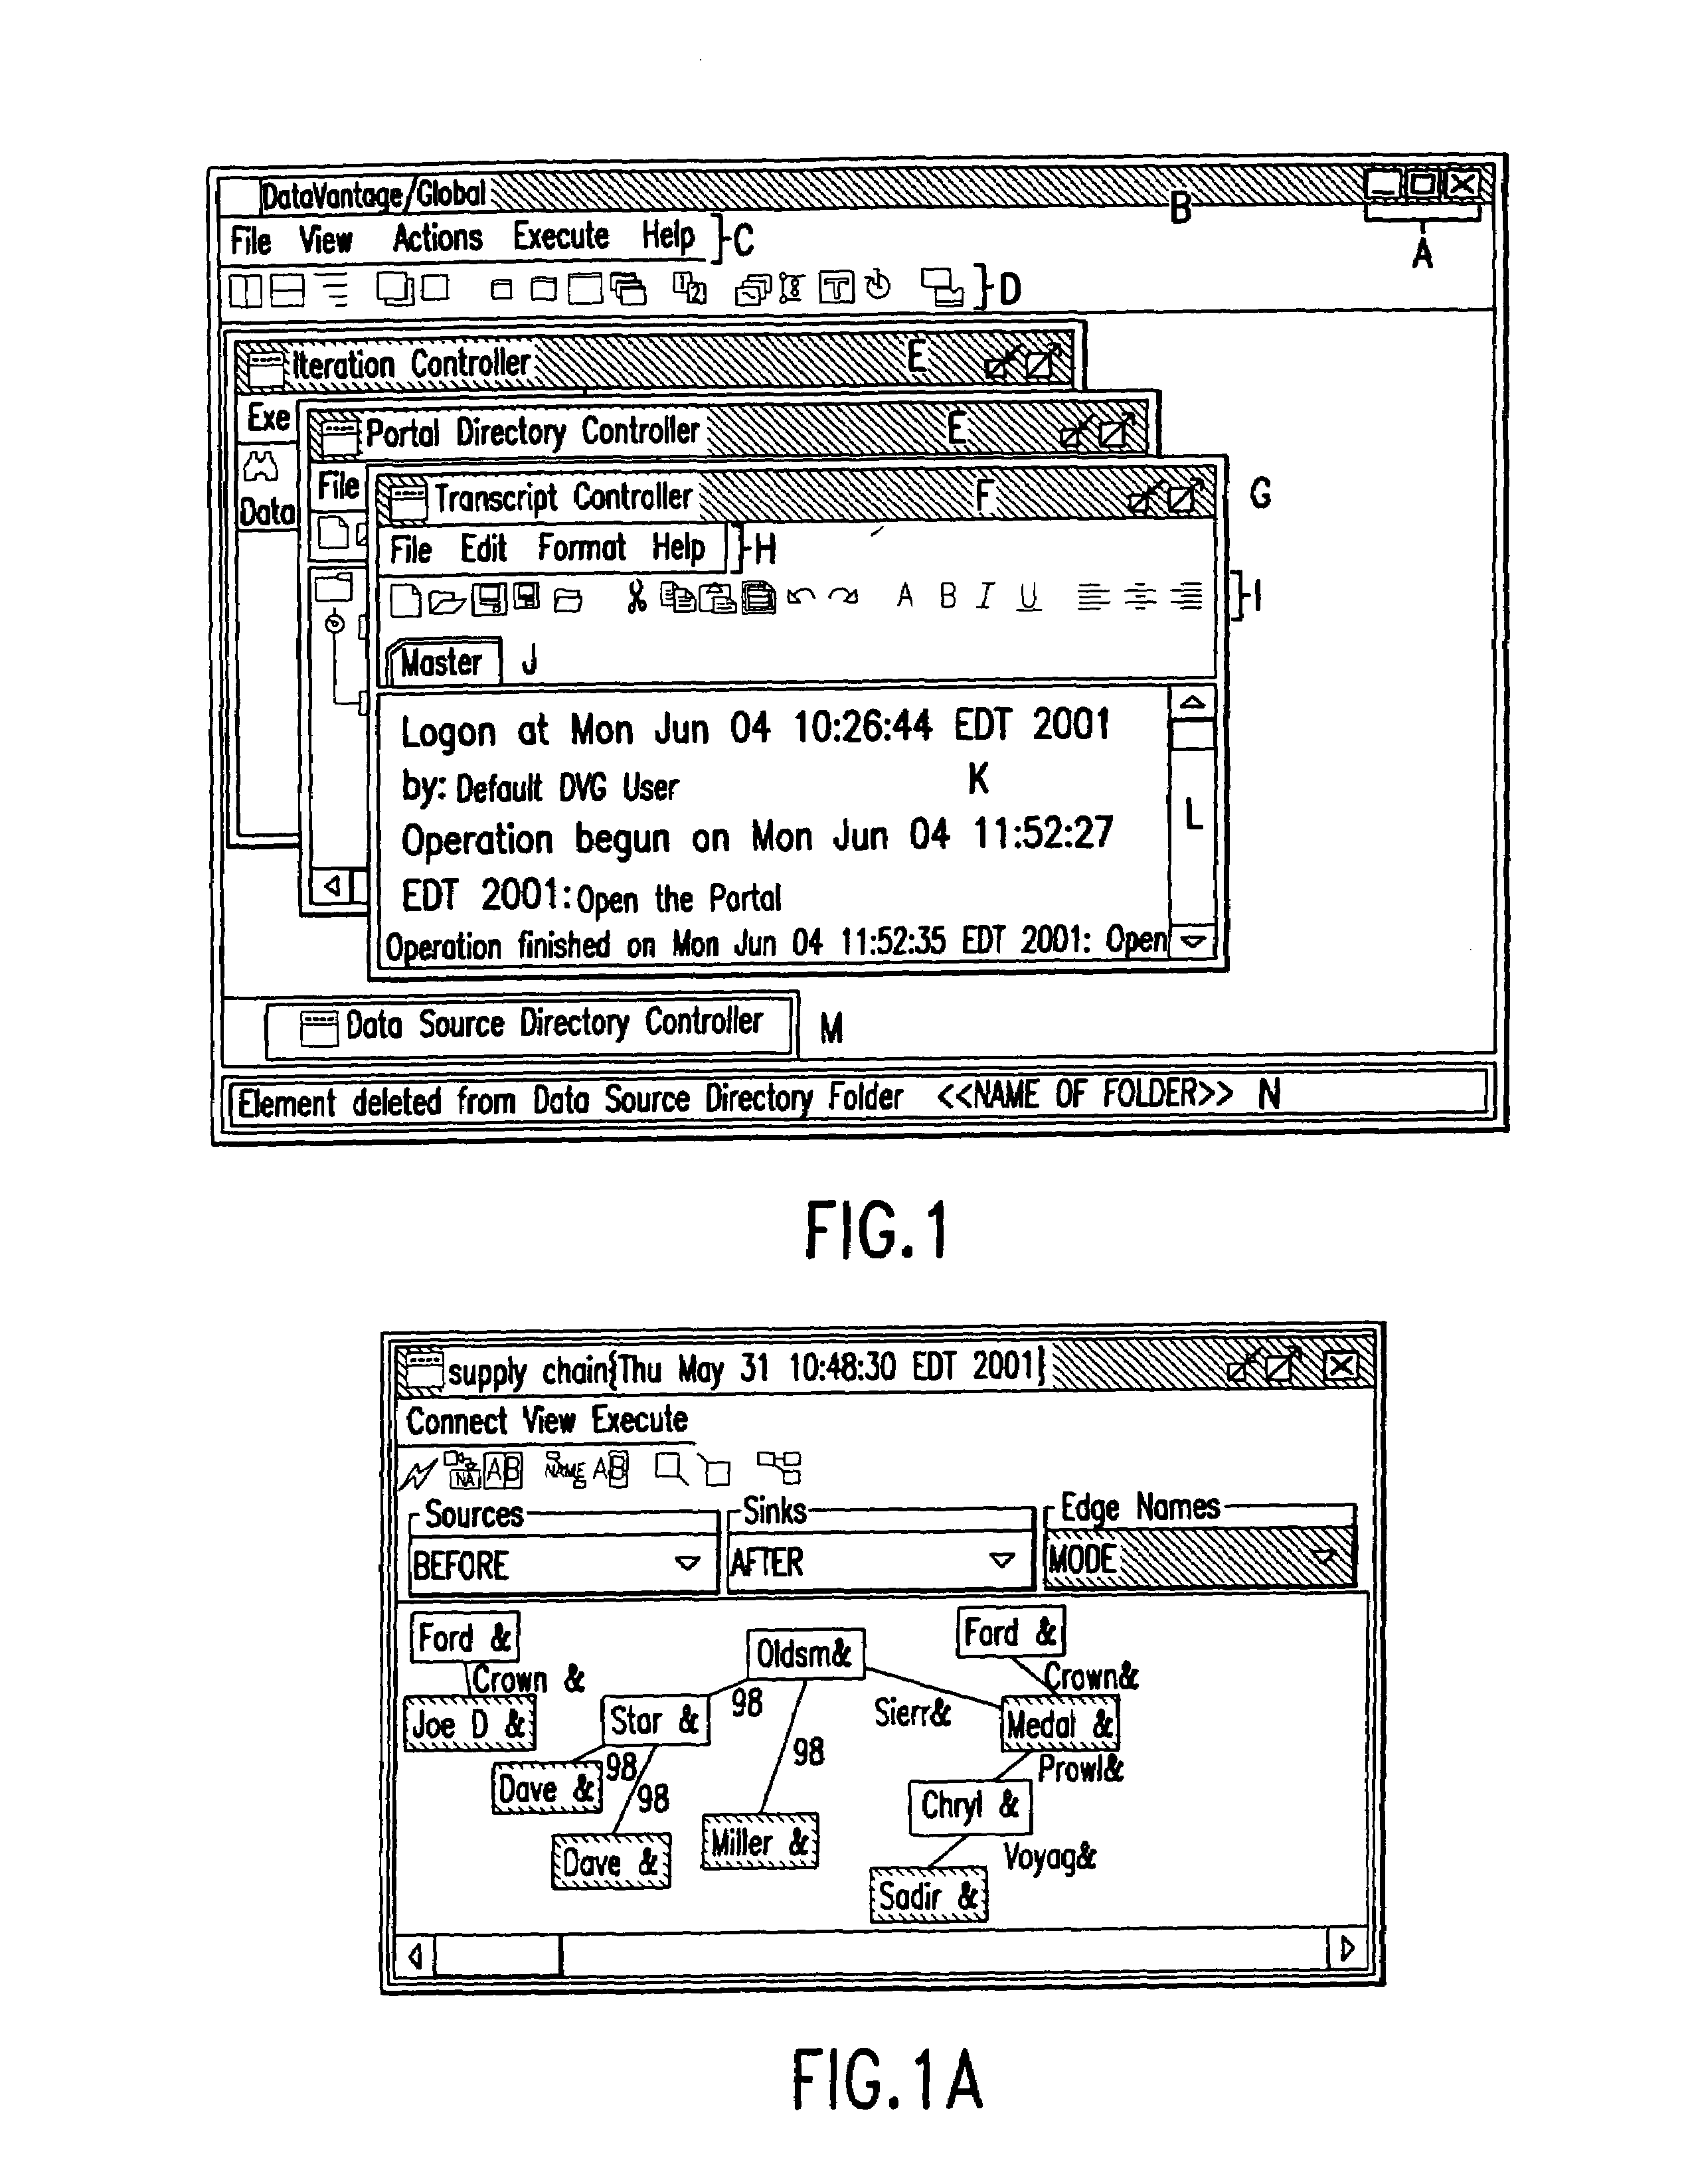 System and method for data quality management and control of heterogeneous data sources